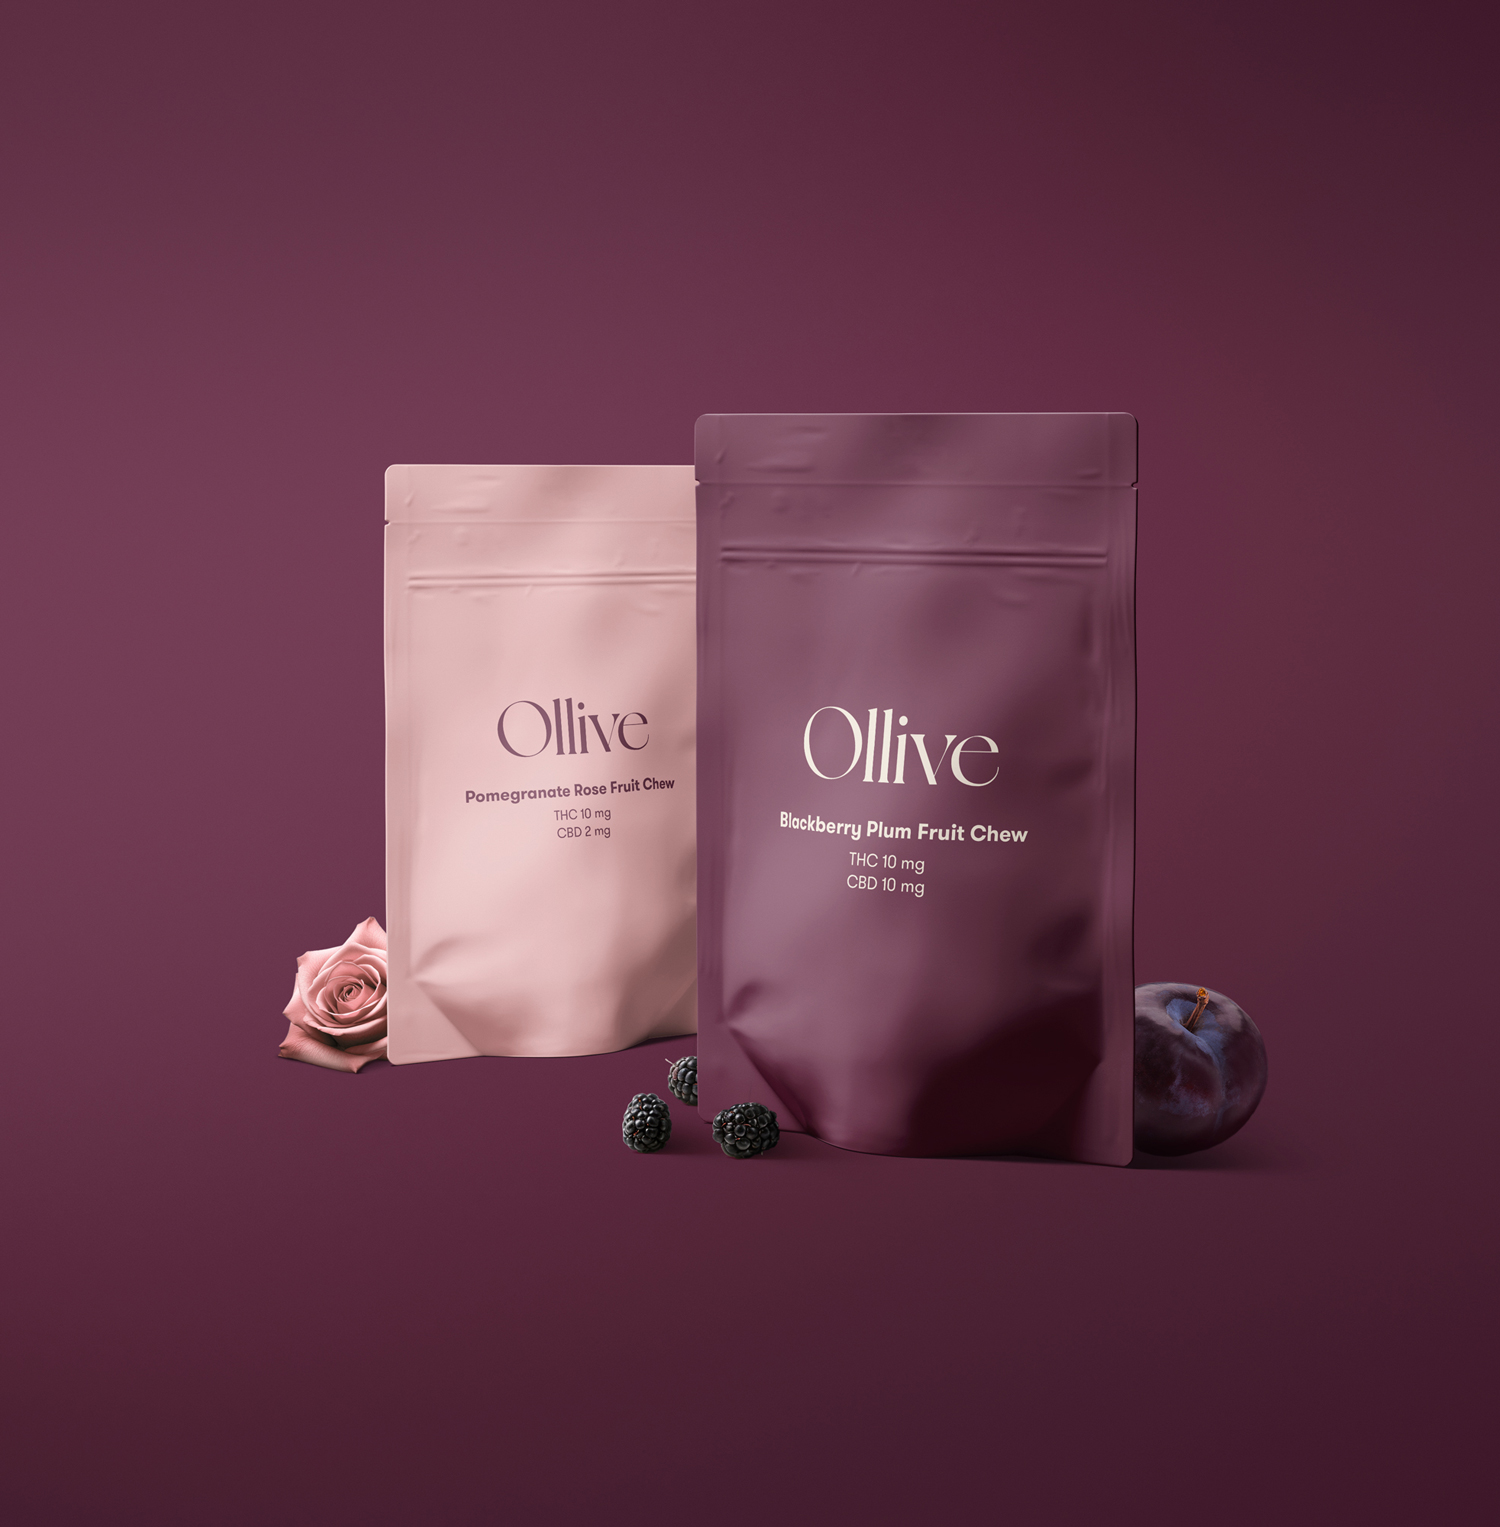 Ollive plant-based and gluten free products are formulated to promote daily wellness and offer an alternative to traditional medicine